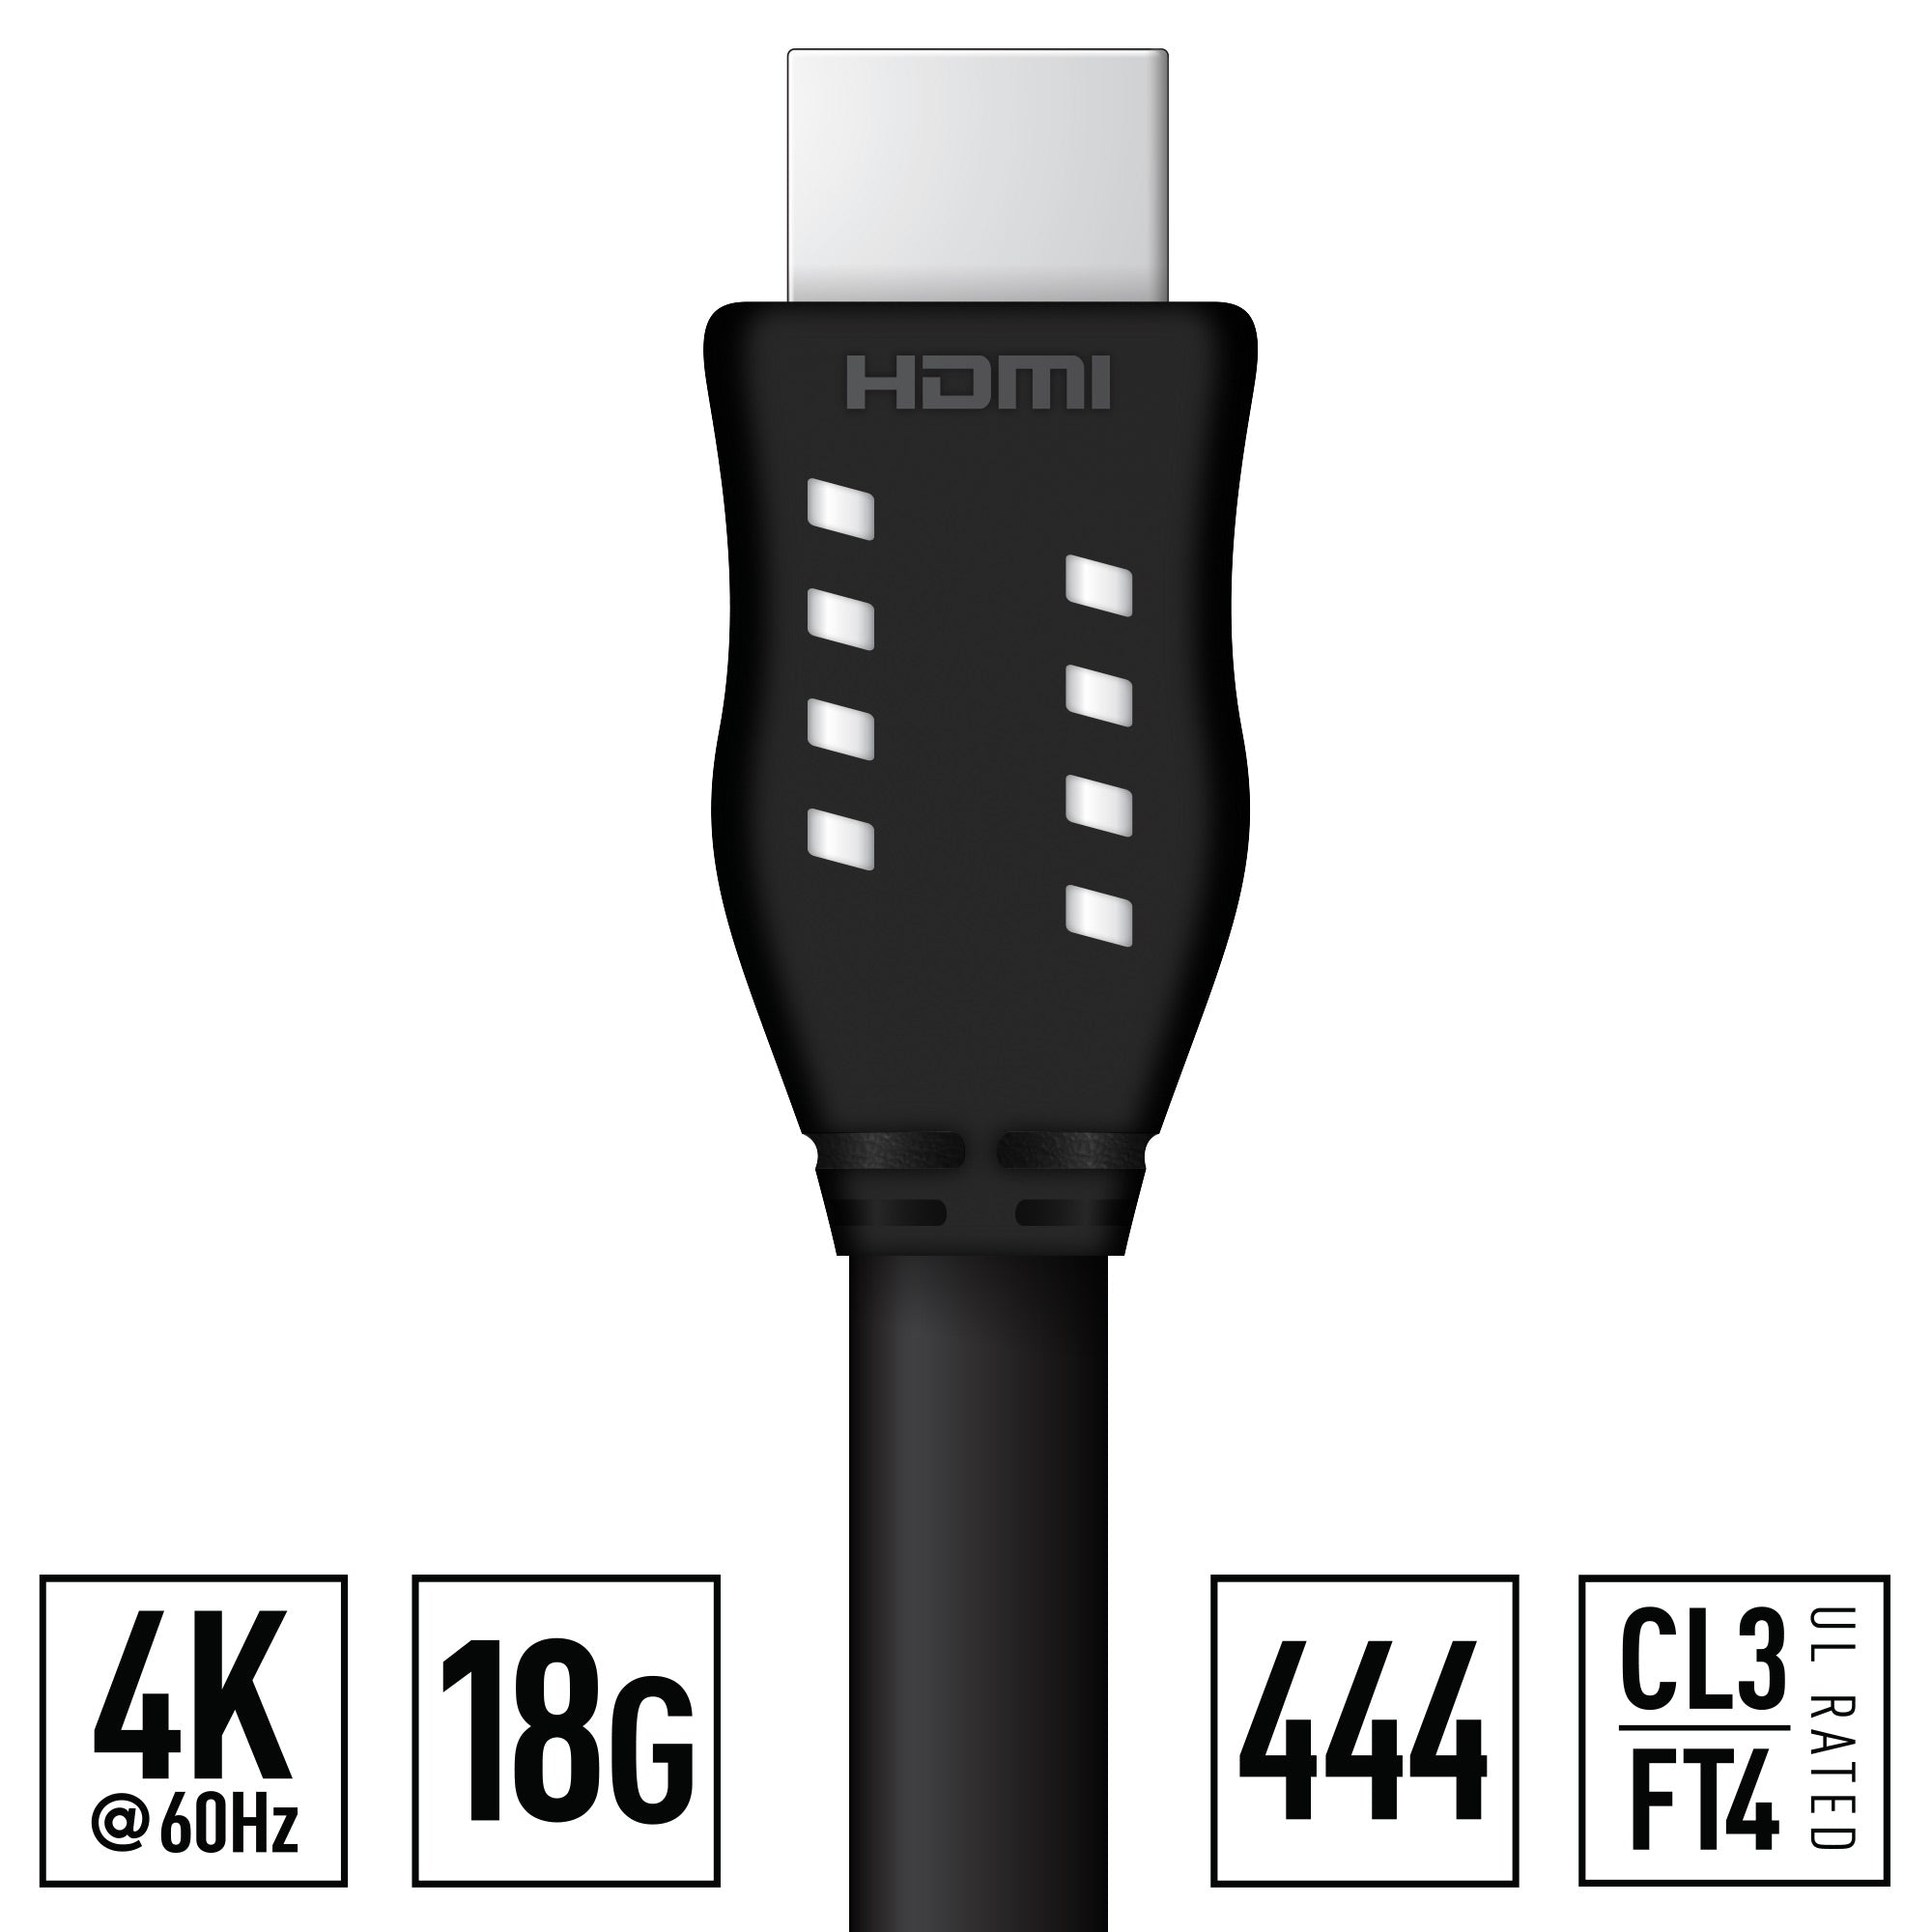 Key Digital 20FT HDMI Cable (4K/18G/444/60Hz/HDR10/HDCP2.2/CL3/FT4, 24AWG) - KD-Pro20